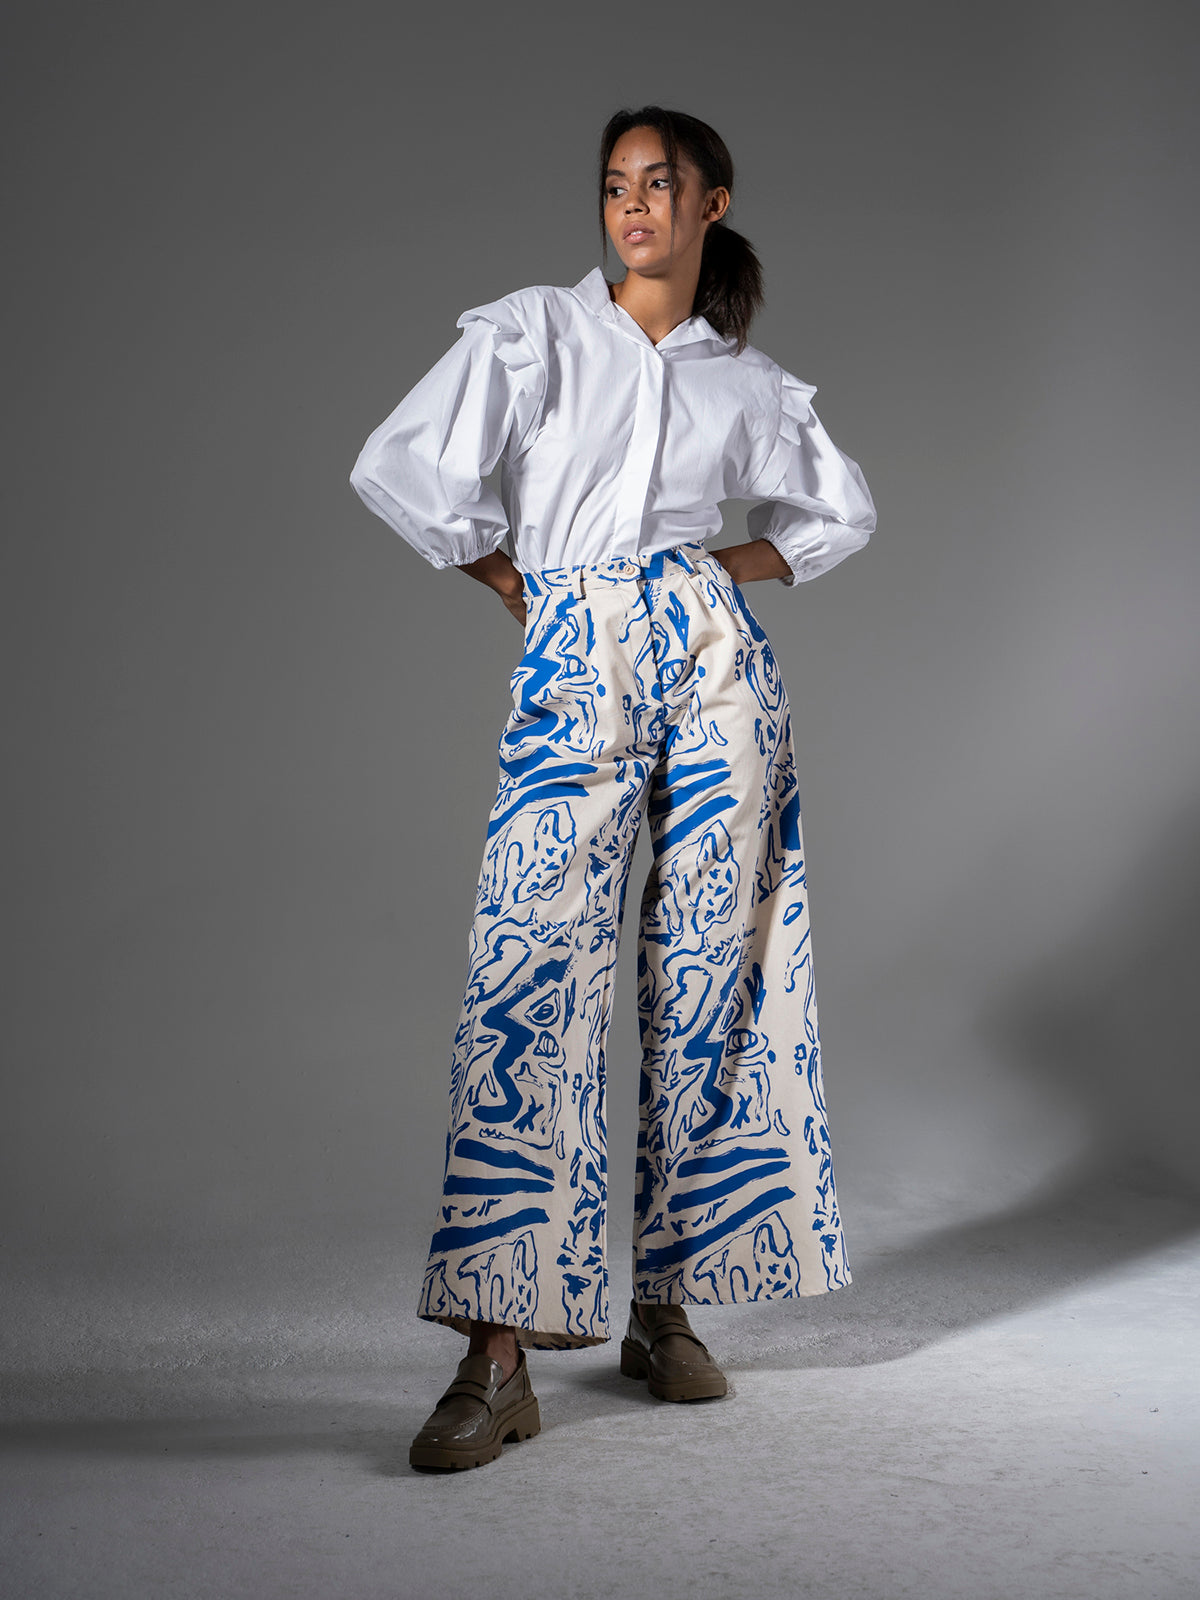 Women's loose pants with natural blue small wave pattern